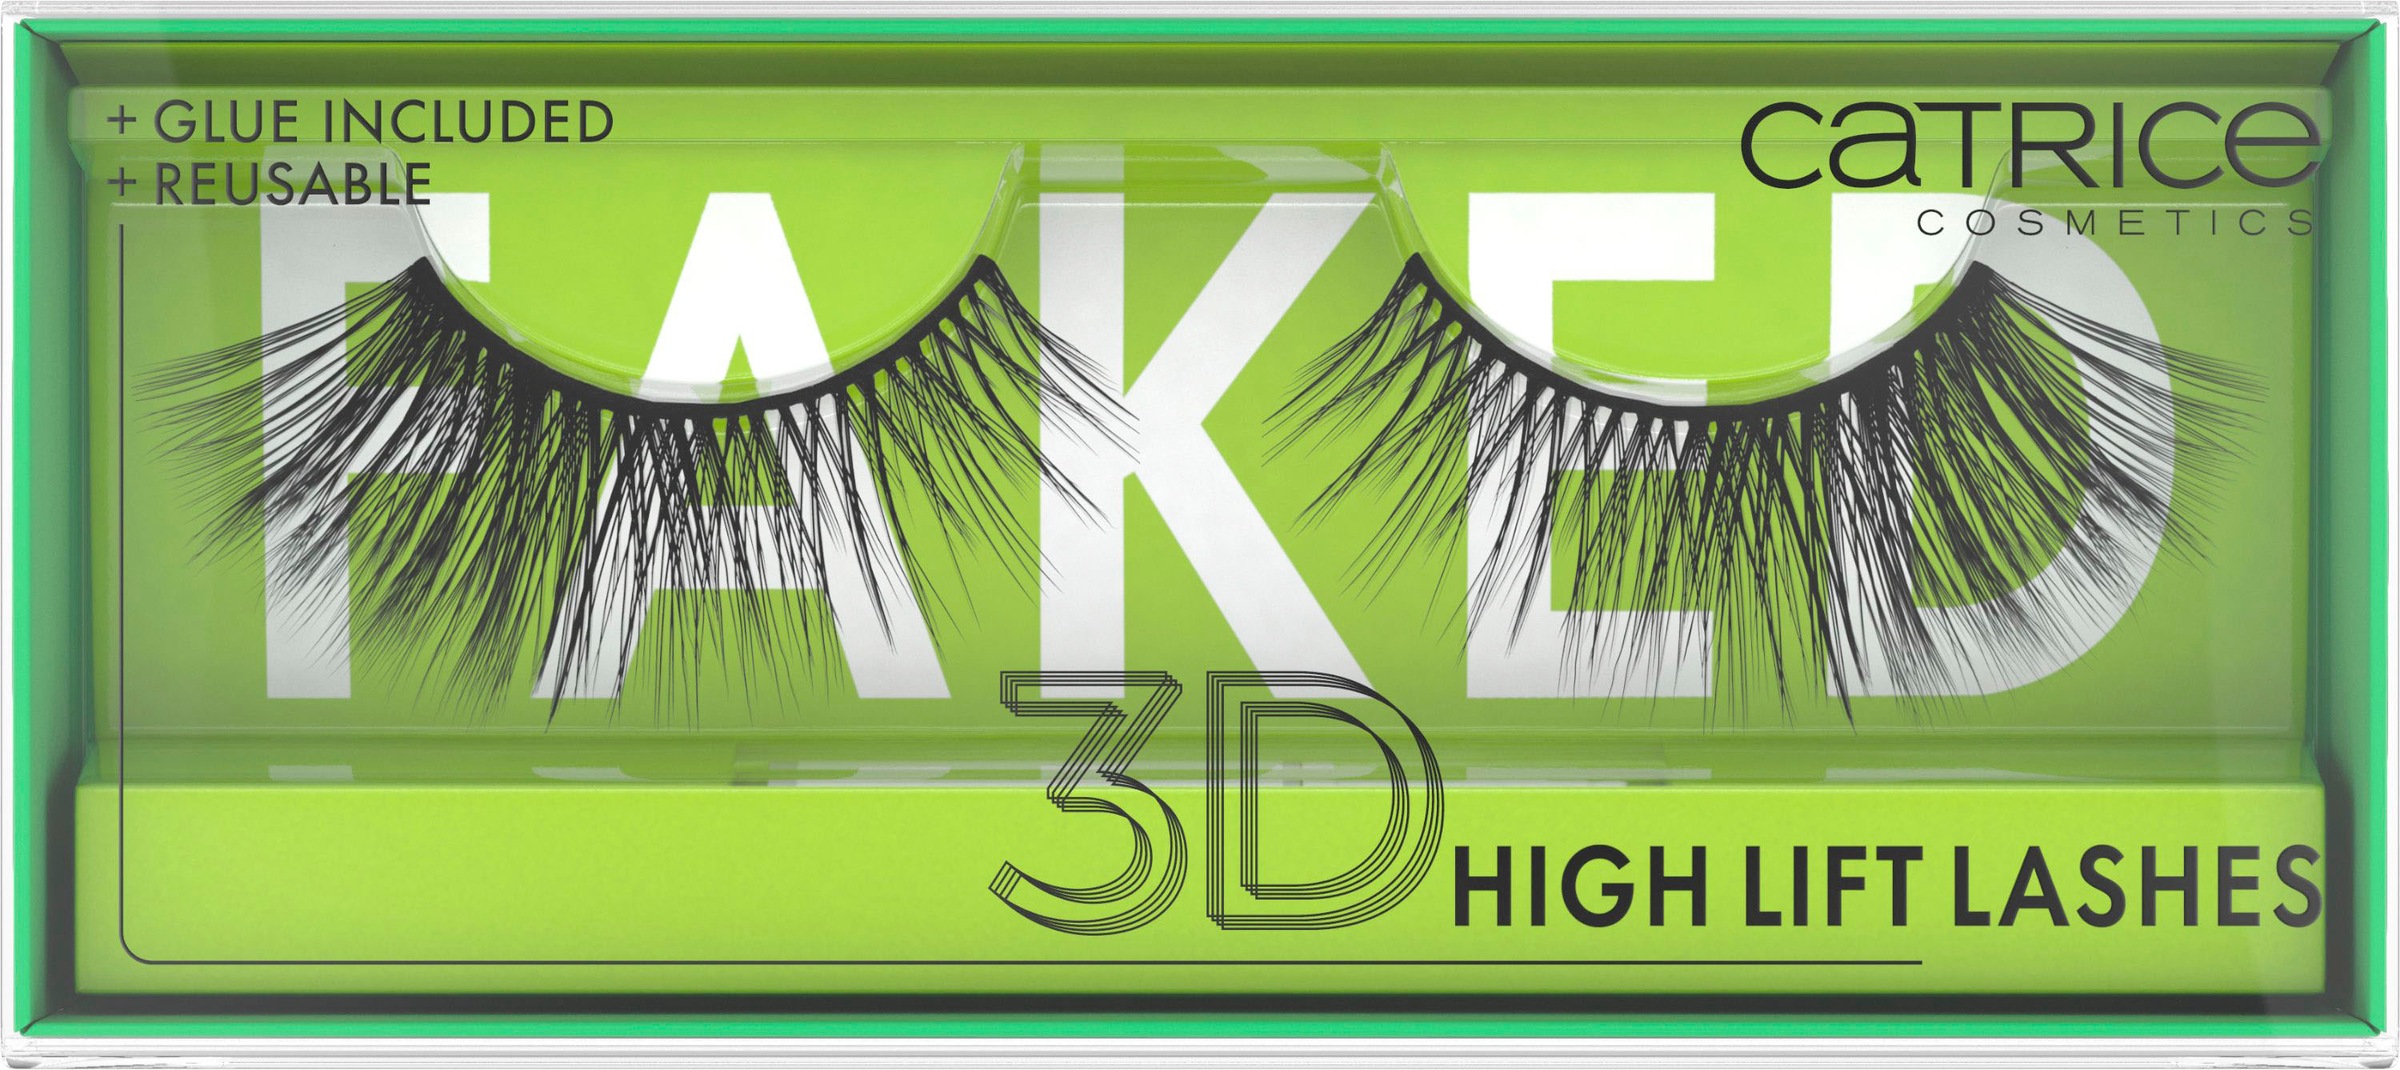 Catrice Bandwimpern »Faked 3D High Lift Lashes...